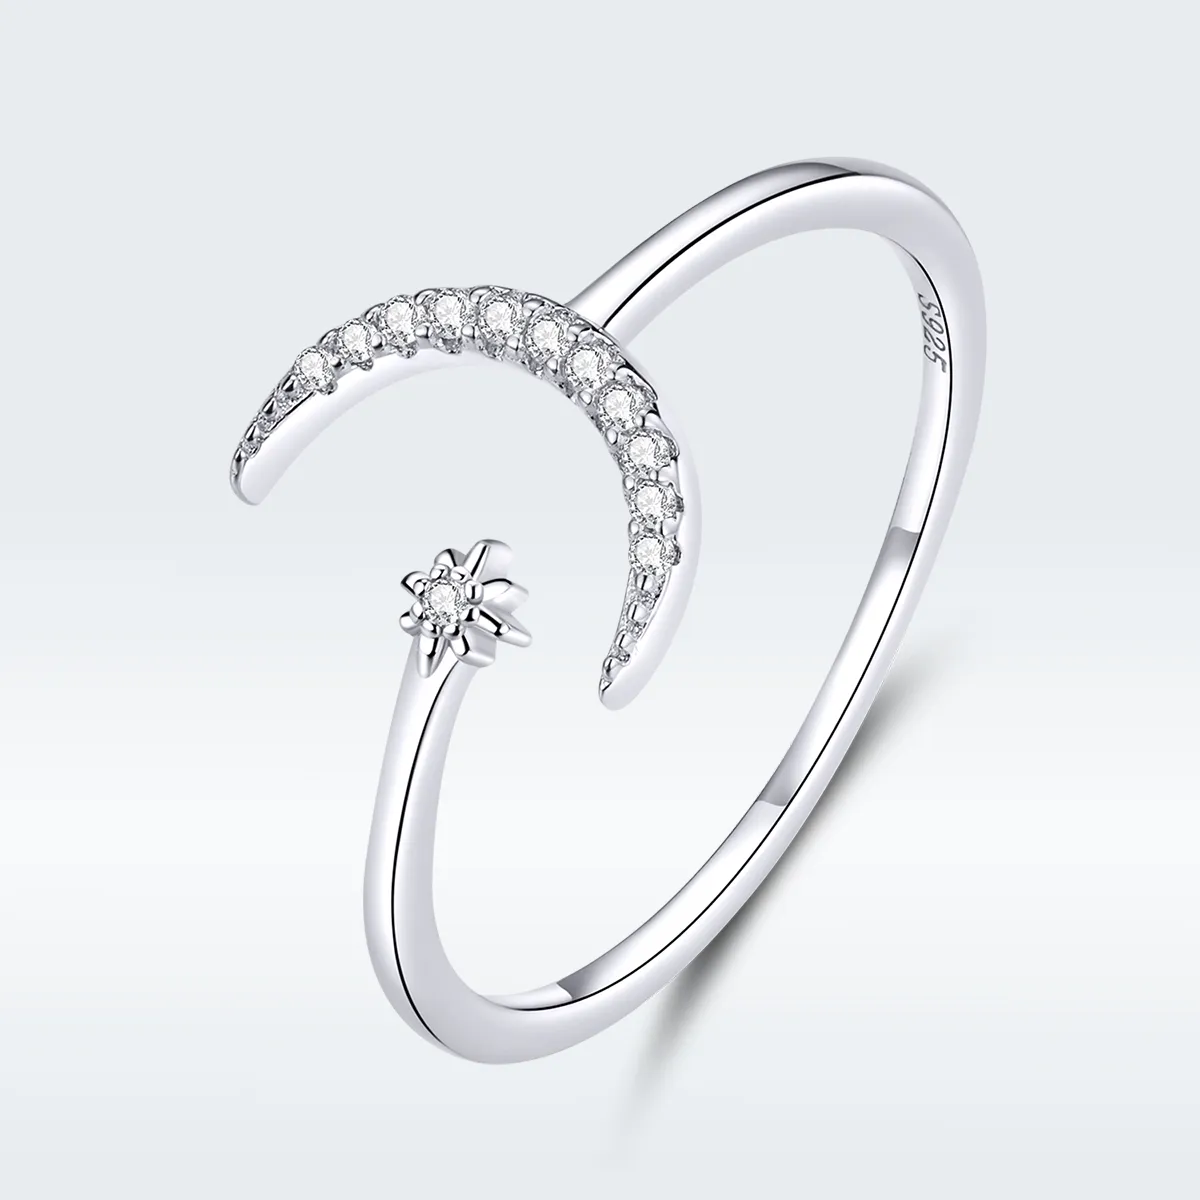 Pandora Style Silver Moon And Star Open Ring - SCR569